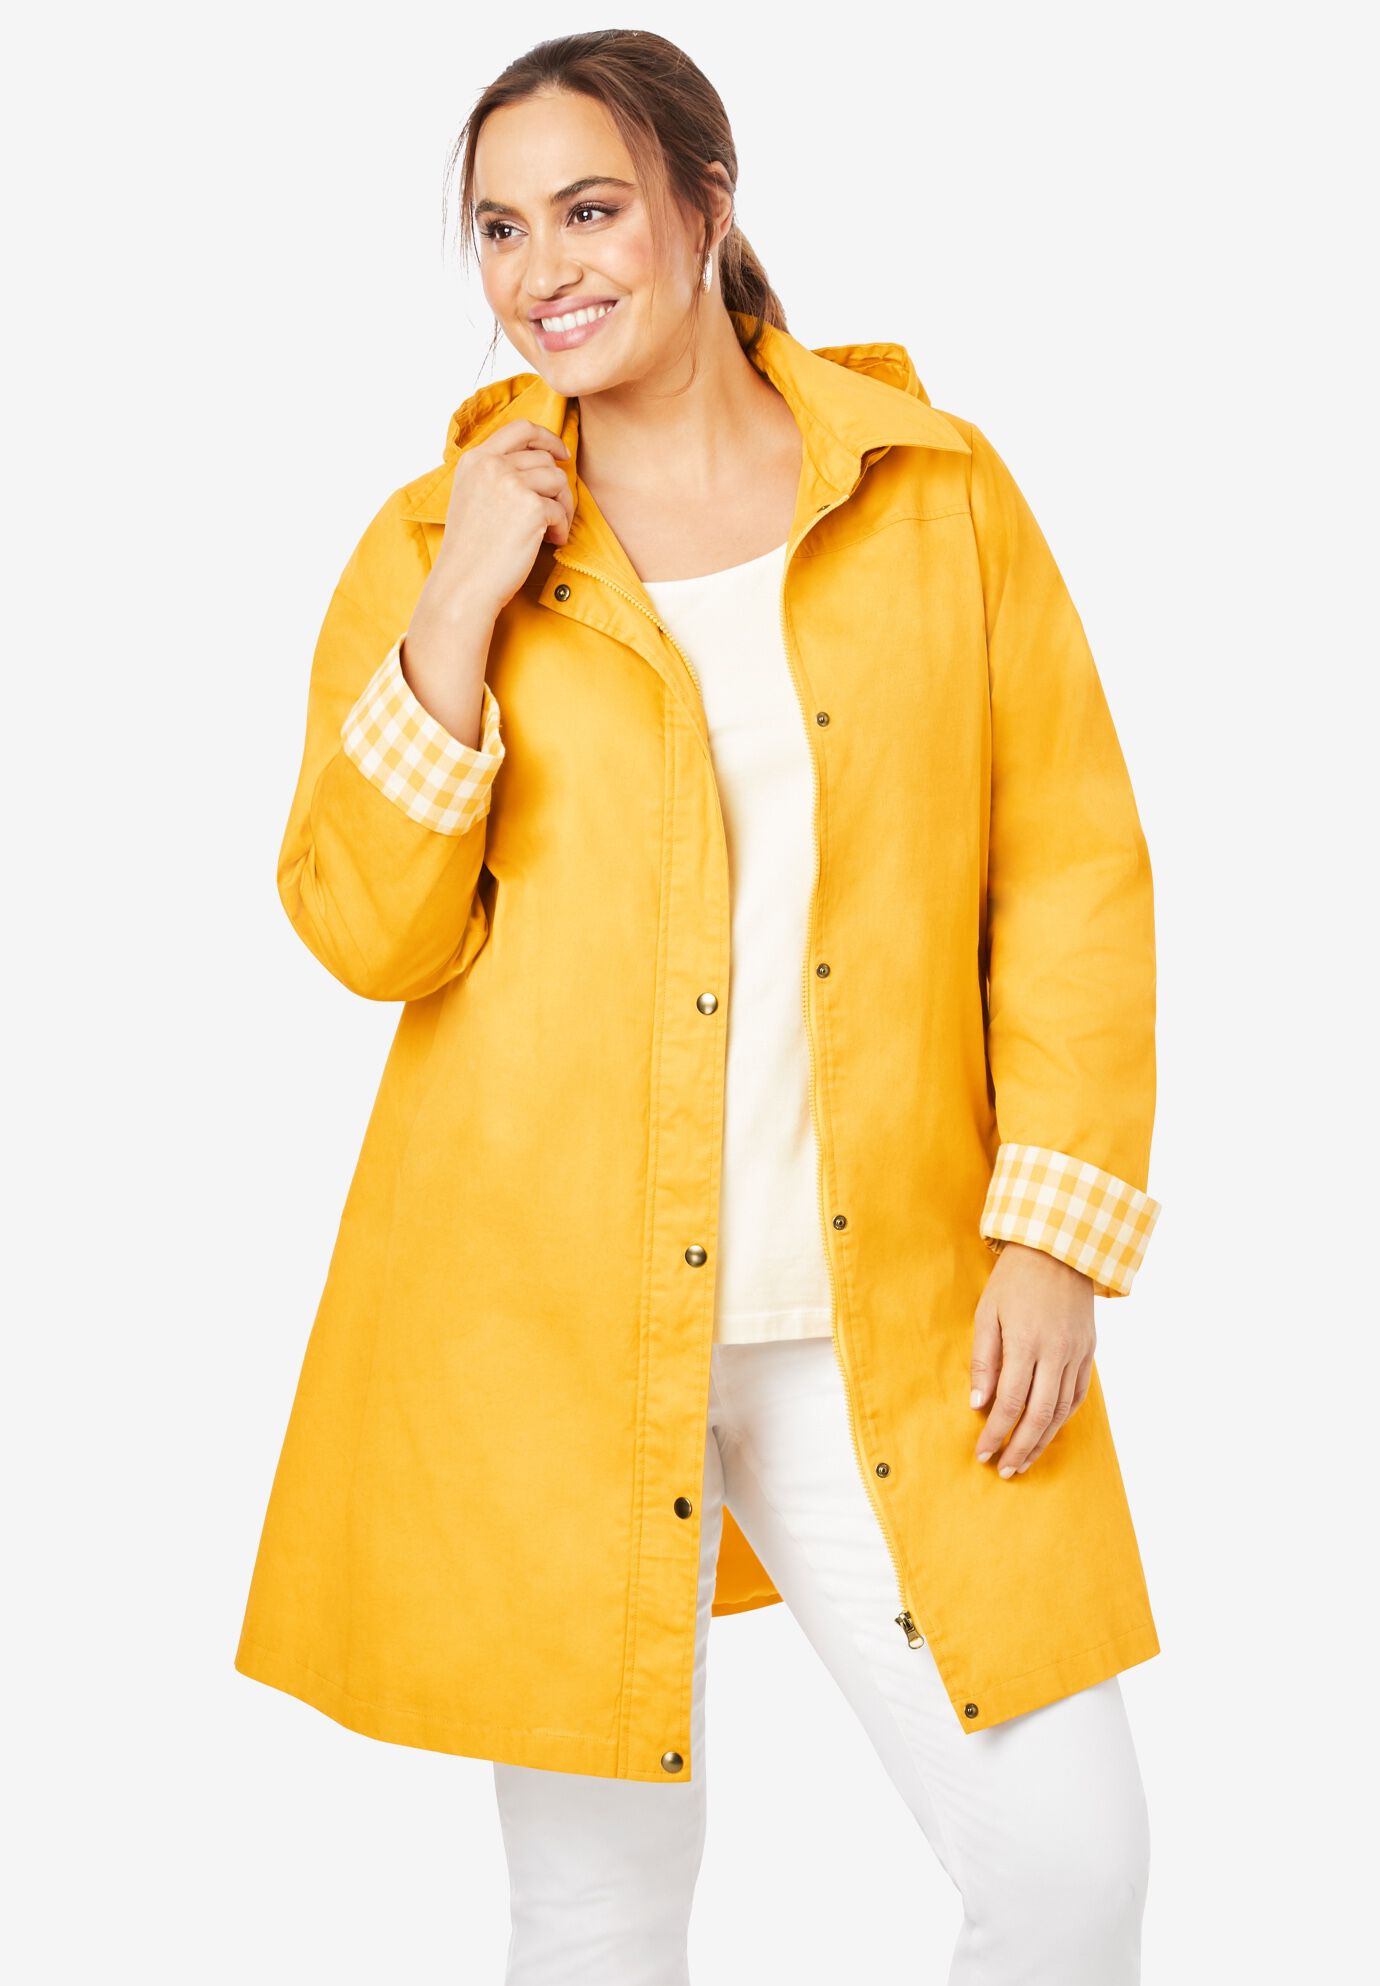 Woman Within Womens Plus Size Raincoat in New Short Length with Fun Dot Trim